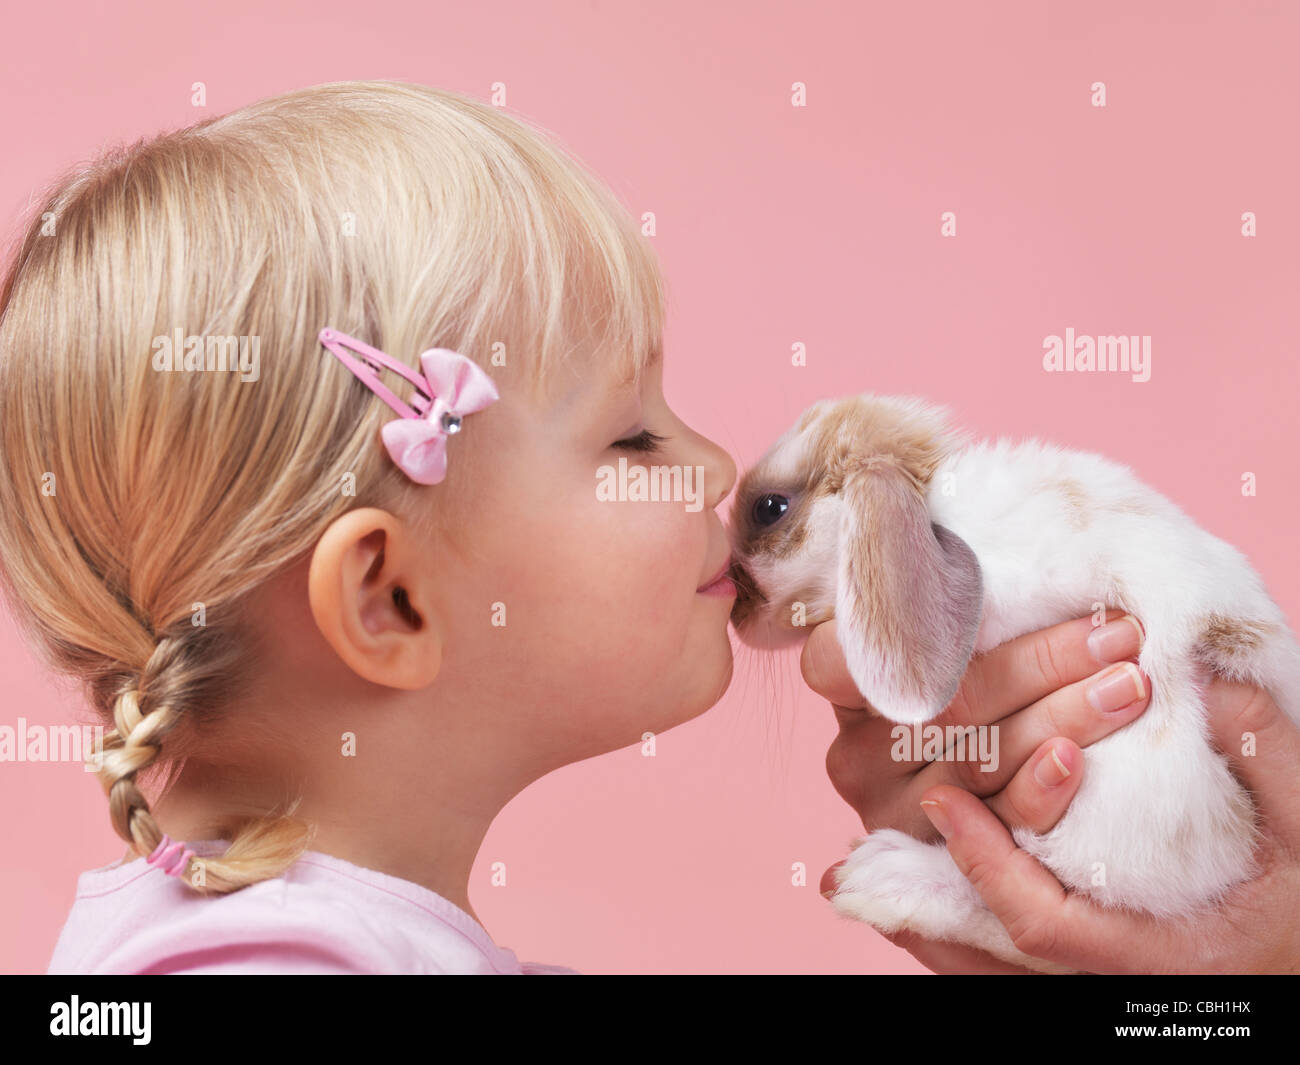 Cute three year old girl kissing a pet rabbit isolated on pink background Stock Photo